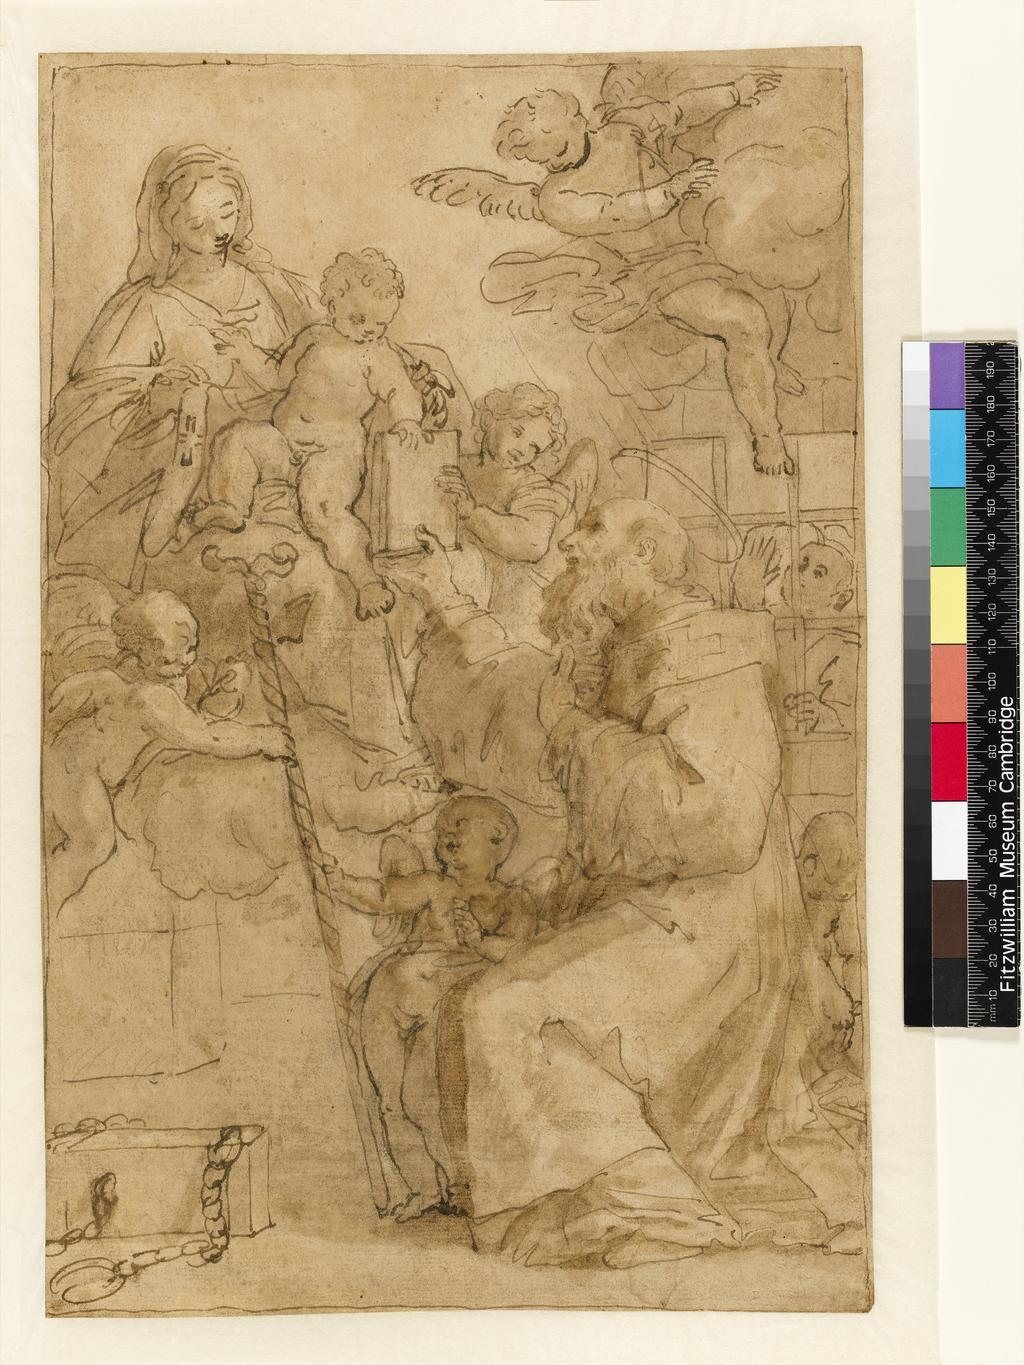 An image of Title/s: The Virgin and Child appearing to S. Girolamo Emiliani (or Miani) in prison Maker/s: Pietri, Pietro Antonio de (draughtsman) [ULAN info: Italian artist, 1663-1716]Technique Description: pen and brown ink, brown wash on buff paper, a line of brown ink borders it on all sides Dimensions: height: 365 mm, width: 238 mm